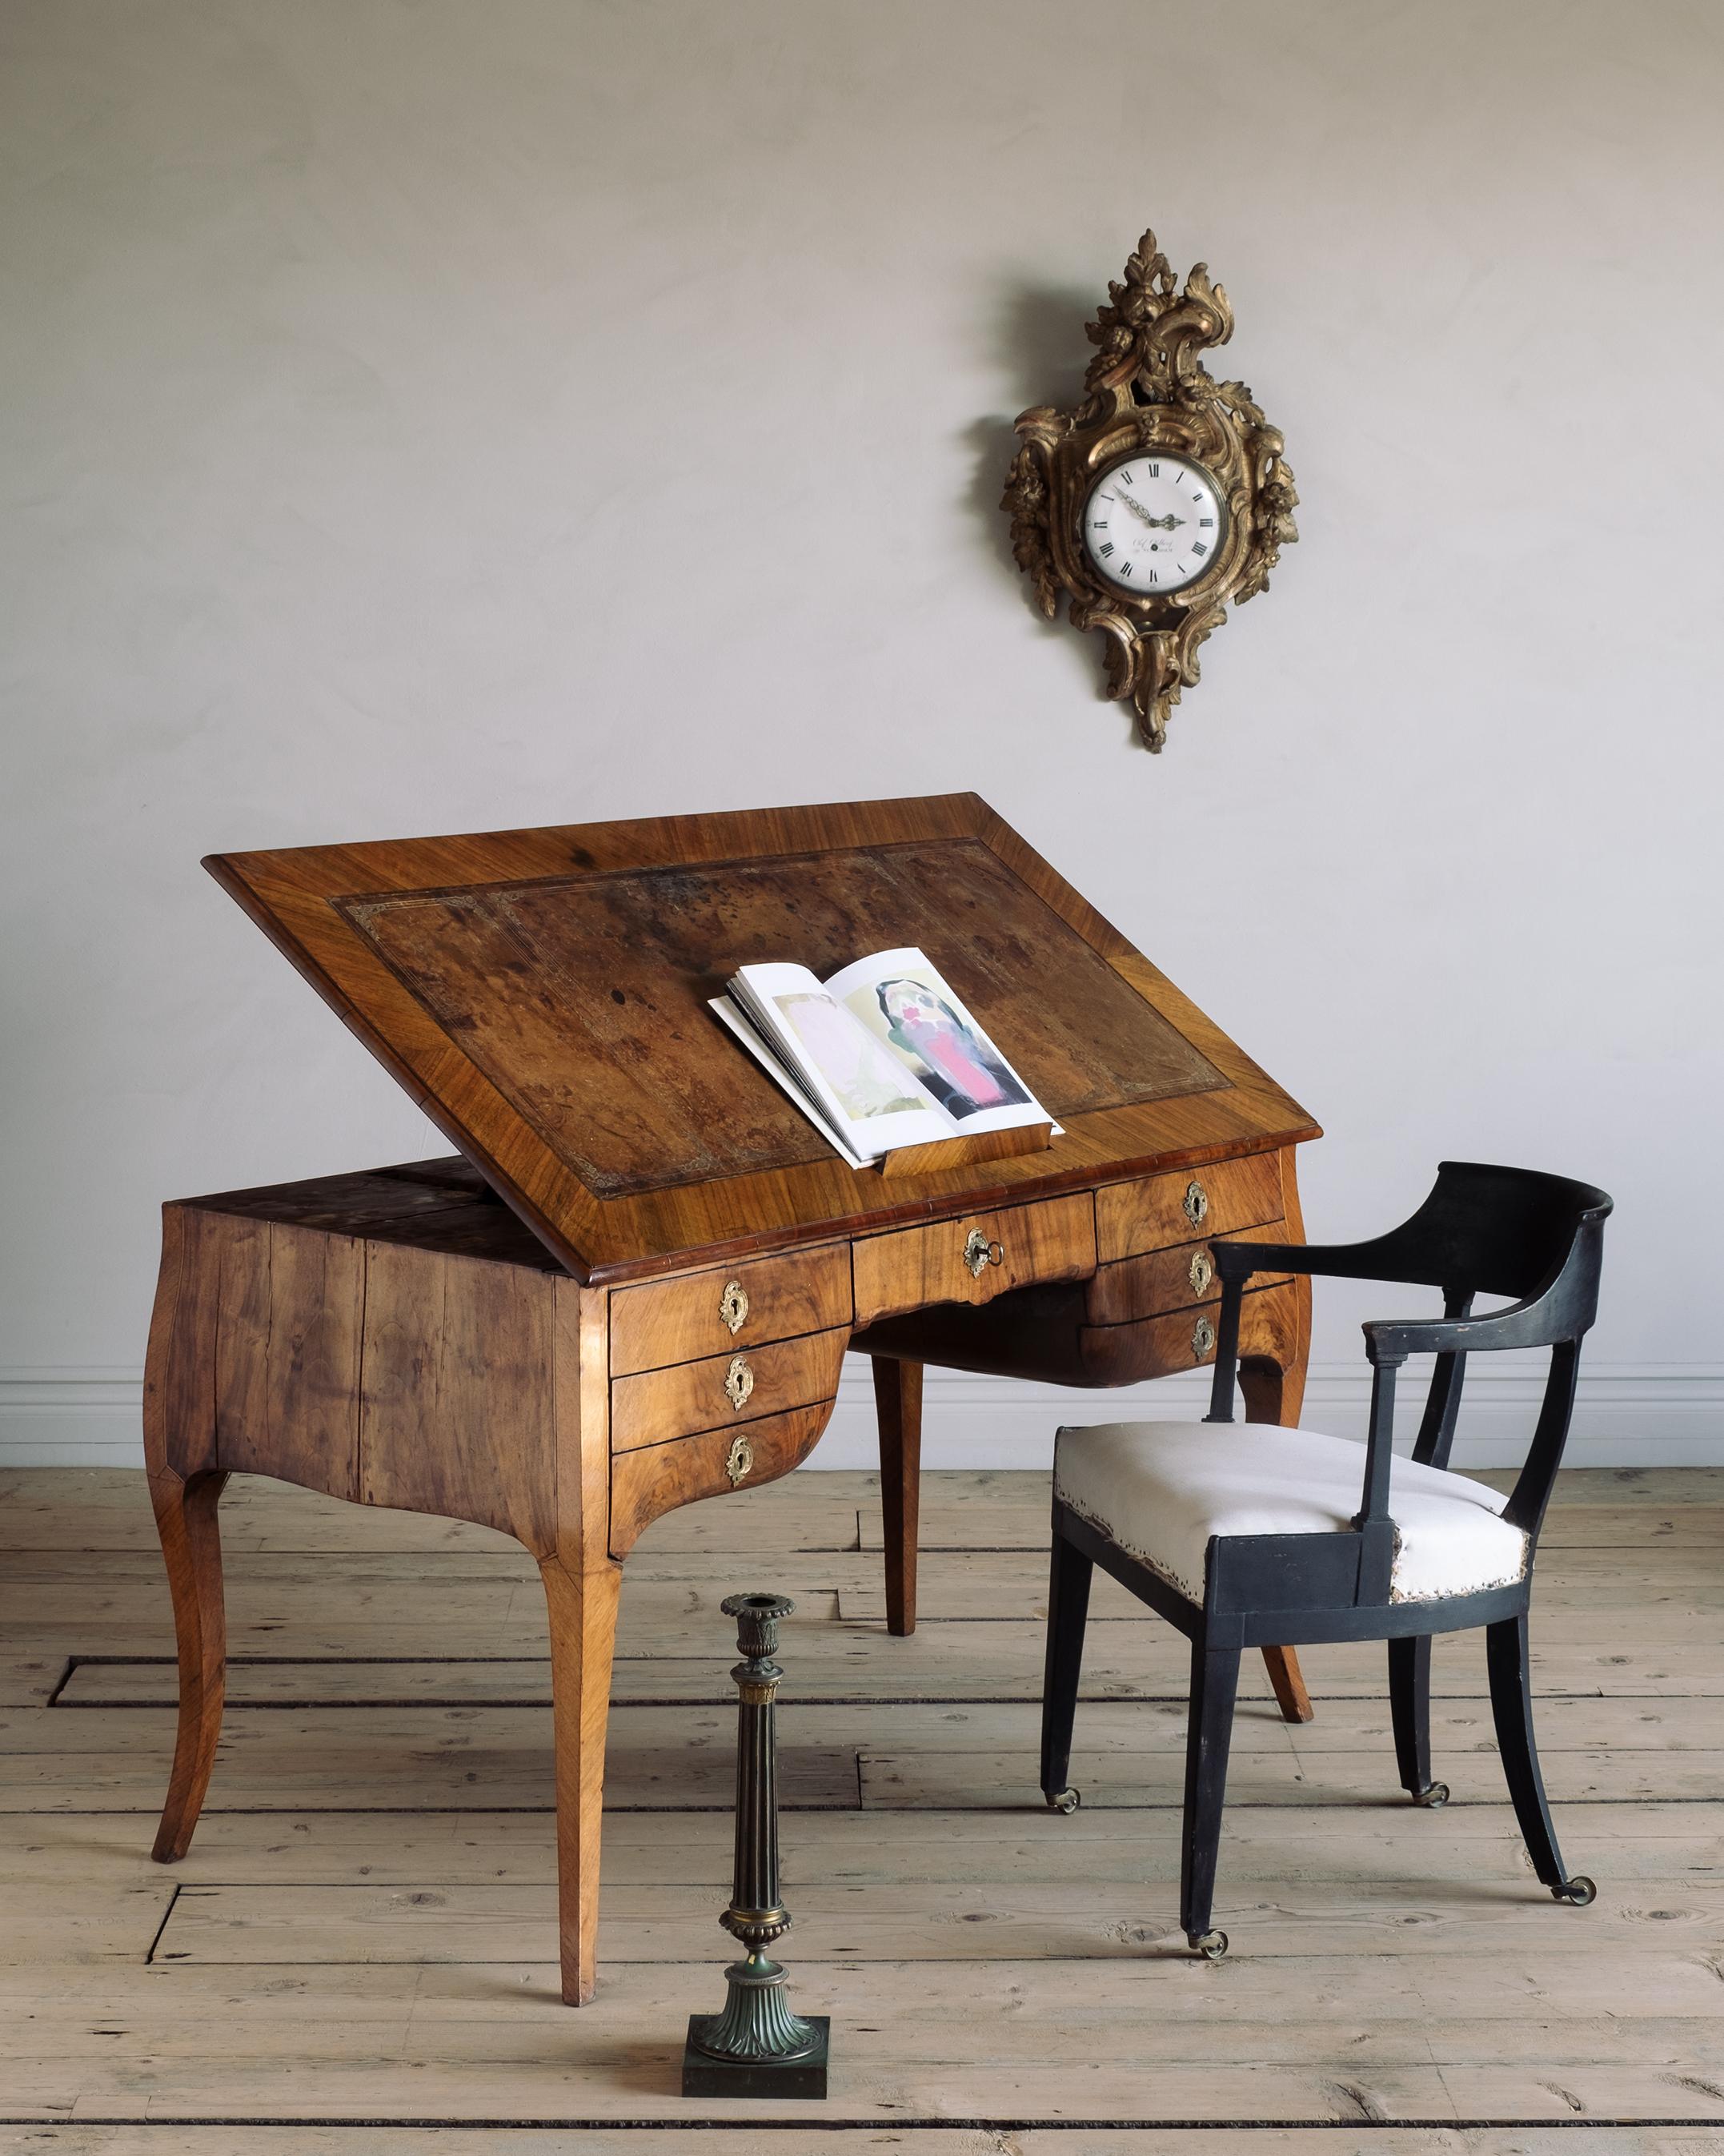 Most unusual and remarkable Swedish Rococo period metamorphic draughtsman's table with seven drawers, adjustable hinged top with book rest and retractable candle holders, circa 1760 Stockholm, Sweden.

Good condition with wear consistent with age